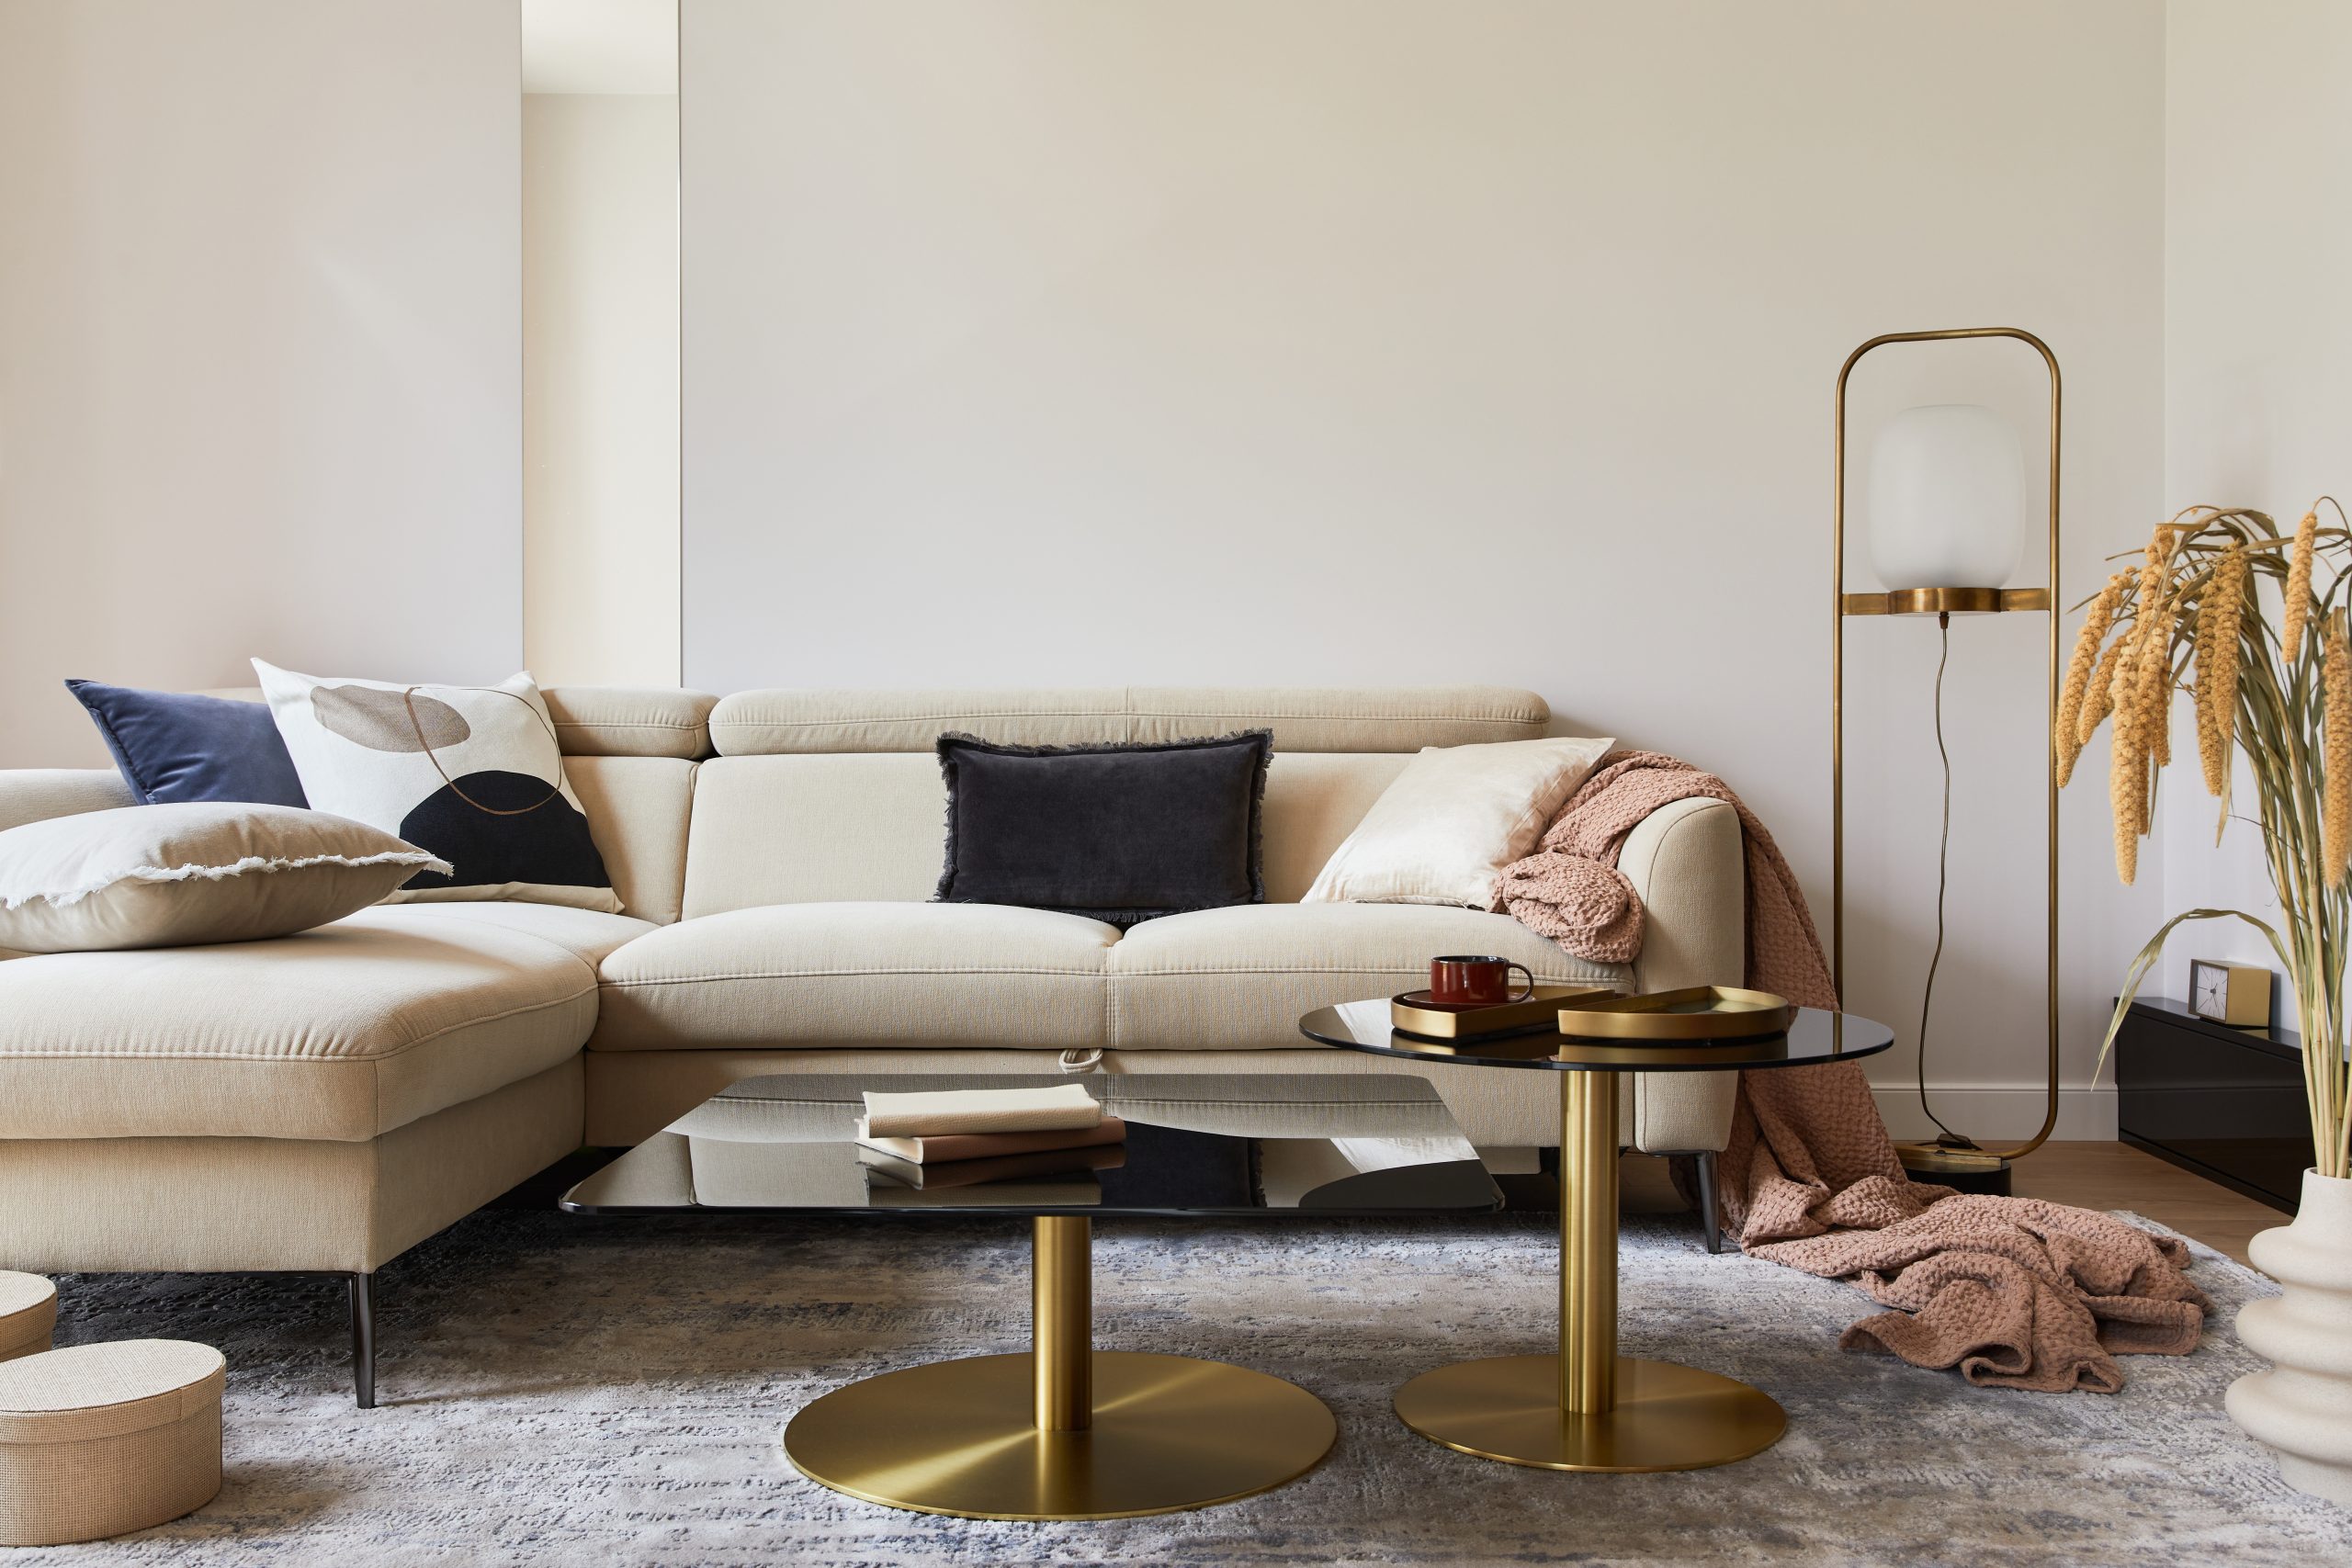 5 Best Sofas For Your Home In 2021 - Home Senator